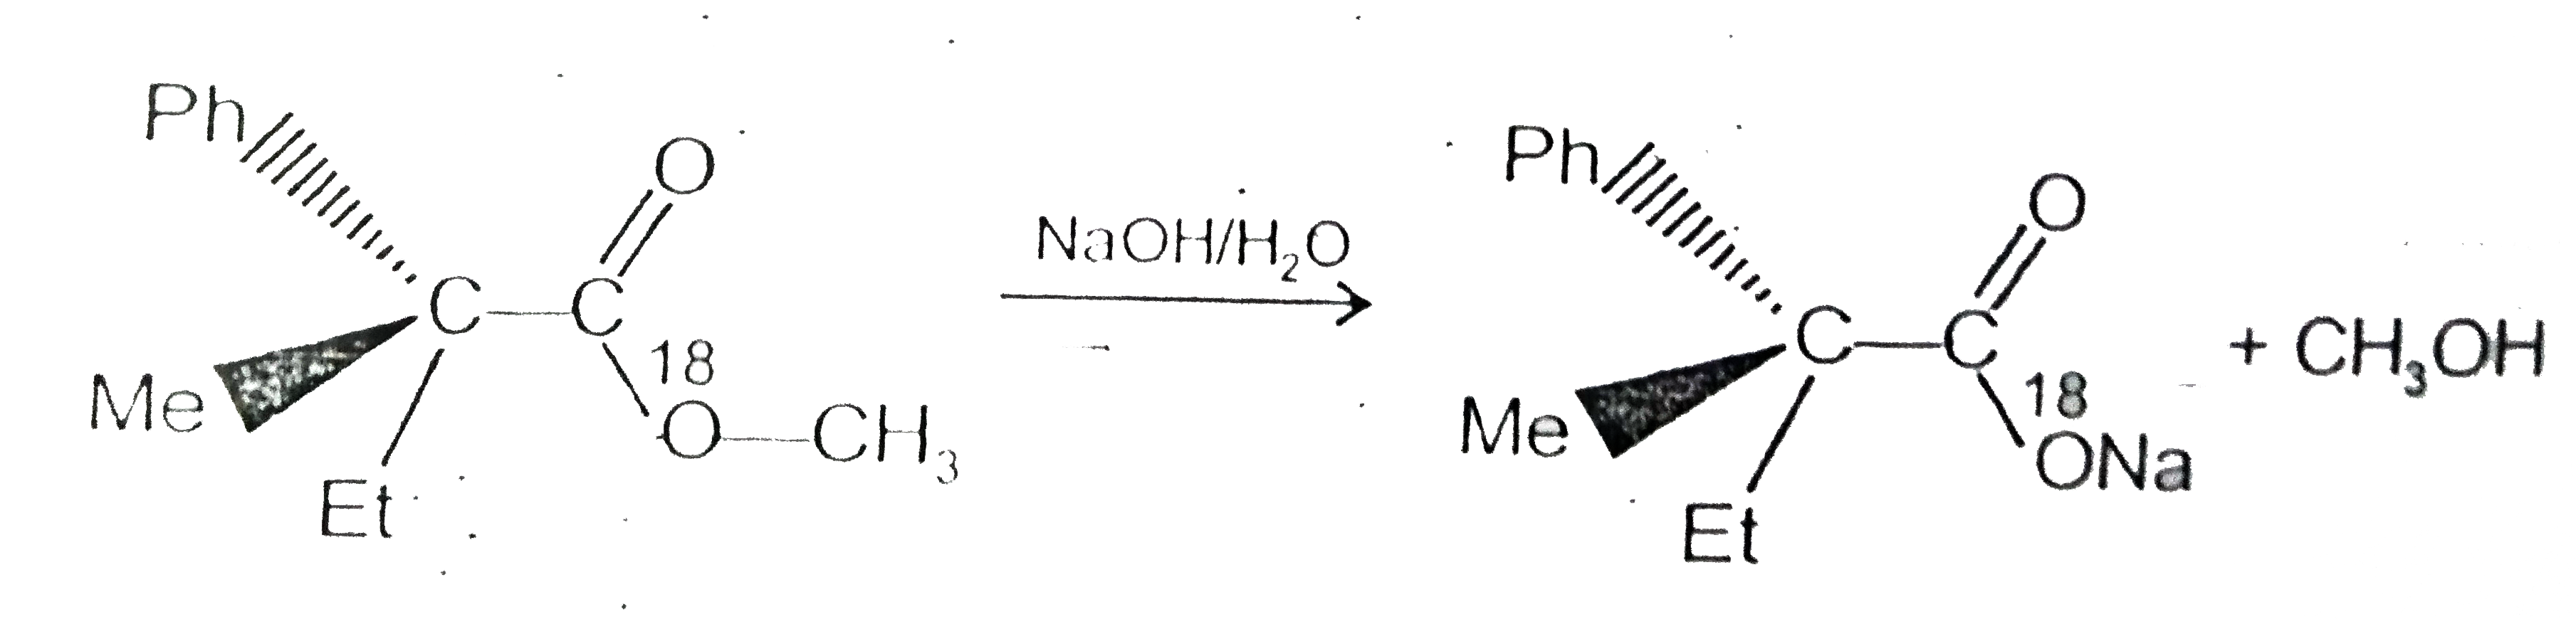 Propose mechanism for the given reaction: